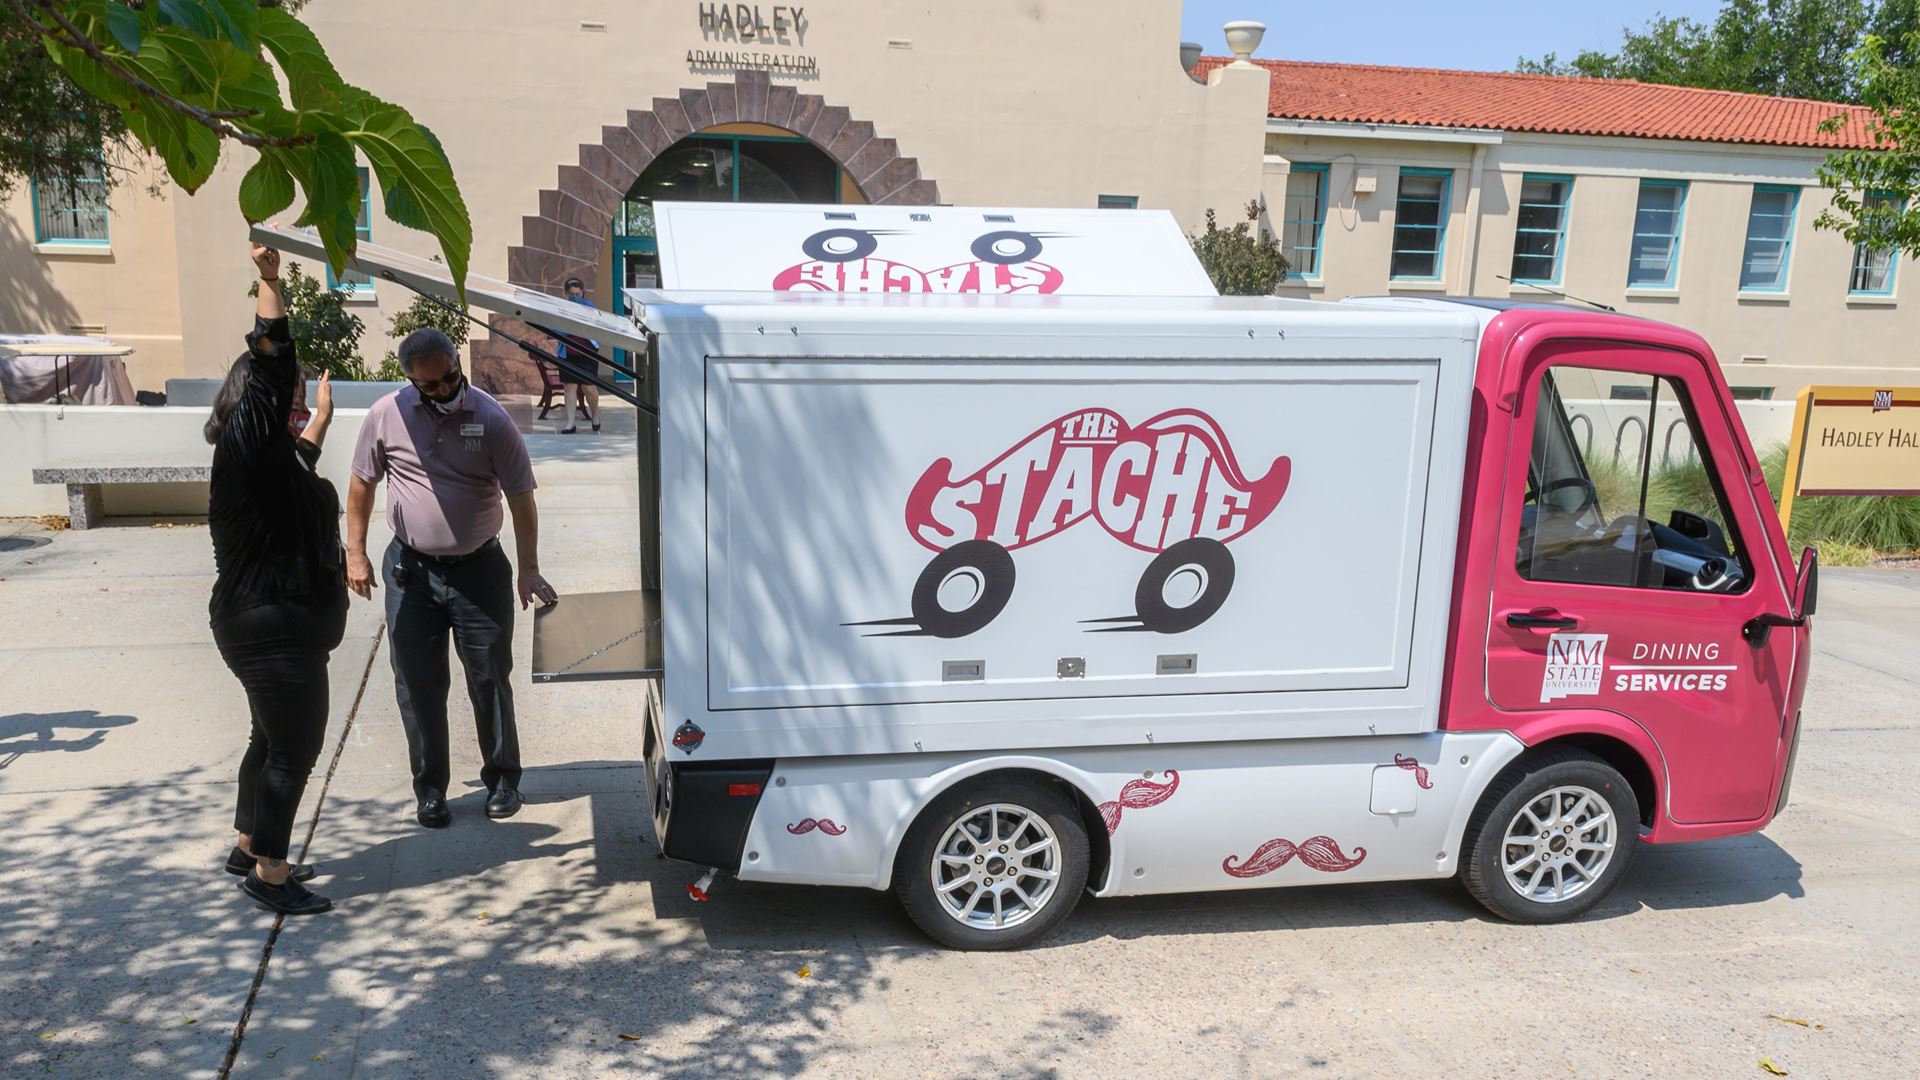 NMSU Dining Services debuts new campus dining option, The Stache food cart